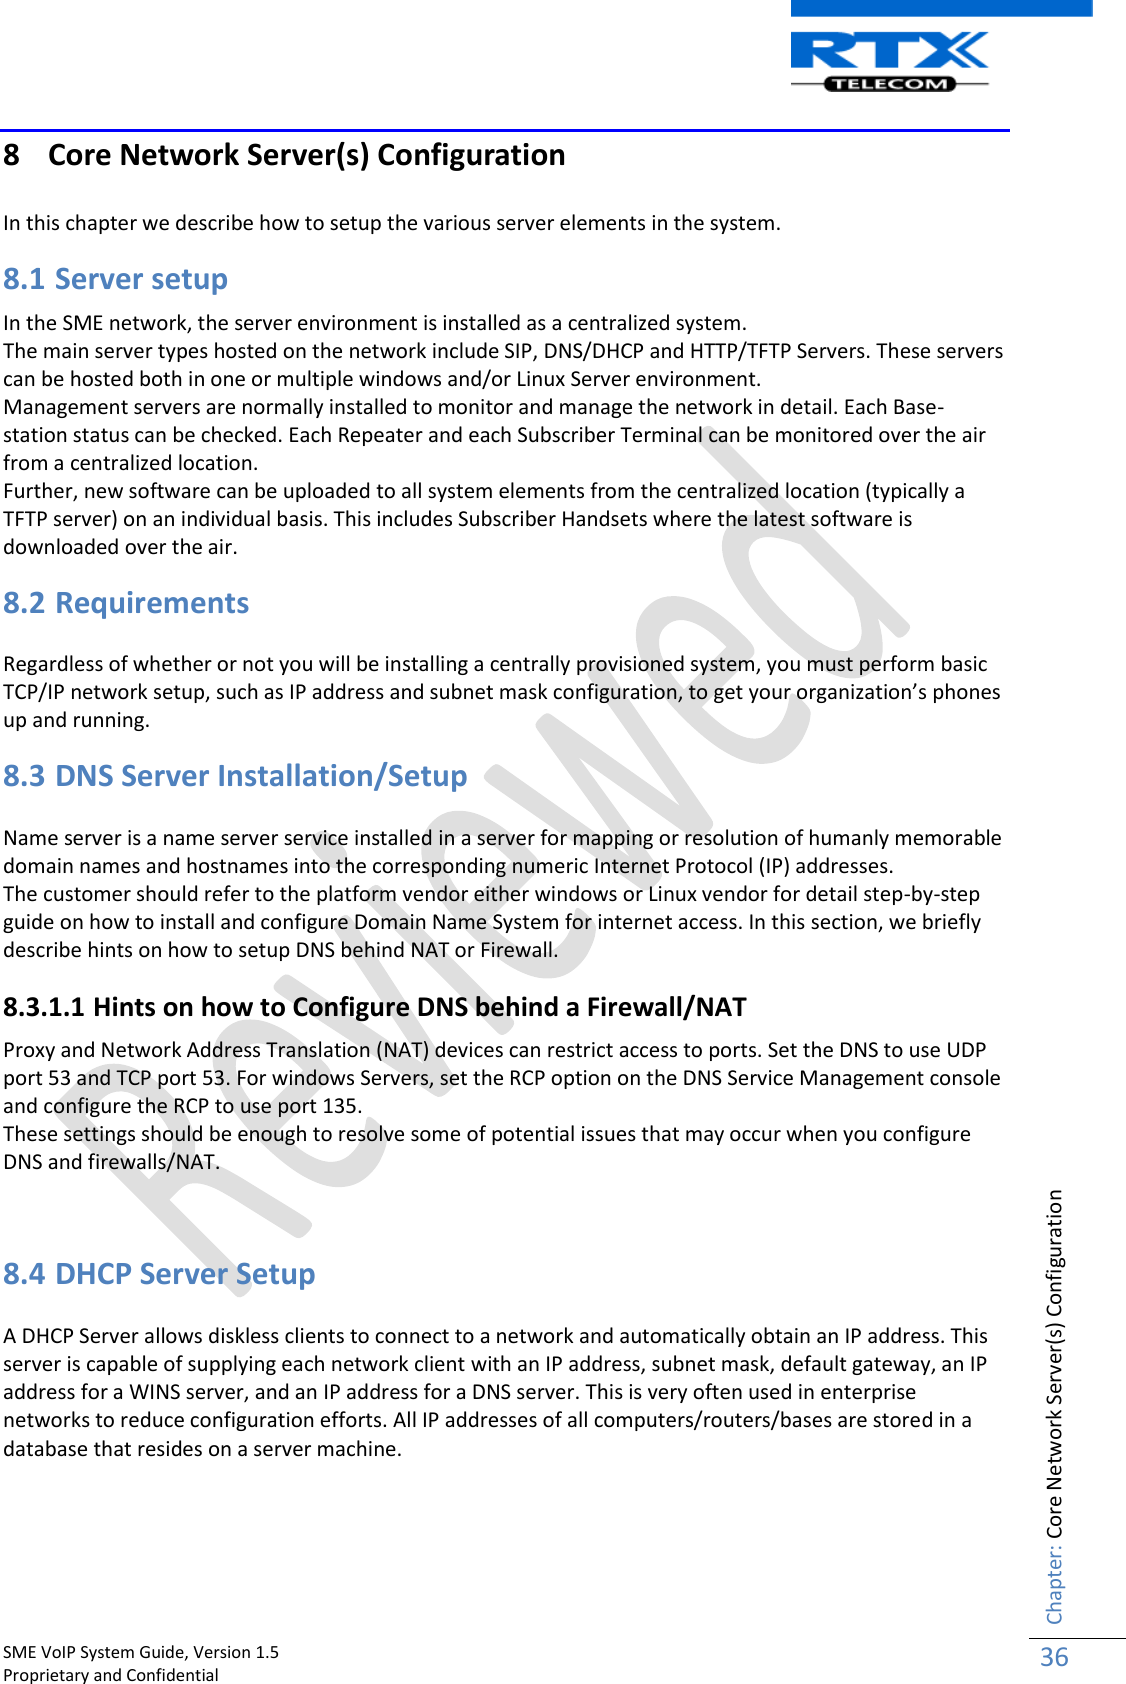    SME VoIP System Guide, Version 1.5                                                                                                                                                          Proprietary and Confidential    Chapter: Core Network Server(s) Configuration 36  8 Core Network Server(s) Configuration  In this chapter we describe how to setup the various server elements in the system. 8.1 Server setup In the SME network, the server environment is installed as a centralized system.  The main server types hosted on the network include SIP, DNS/DHCP and HTTP/TFTP Servers. These servers can be hosted both in one or multiple windows and/or Linux Server environment.   Management servers are normally installed to monitor and manage the network in detail. Each Base-station status can be checked. Each Repeater and each Subscriber Terminal can be monitored over the air from a centralized location. Further, new software can be uploaded to all system elements from the centralized location (typically a TFTP server) on an individual basis. This includes Subscriber Handsets where the latest software is downloaded over the air. 8.2 Requirements  Regardless of whether or not you will be installing a centrally provisioned system, you must perform basic TCP/IP network setup, such as IP address and subnet mask configuration, to get your organization’s phones up and running. 8.3 DNS Server Installation/Setup  Name server is a name server service installed in a server for mapping or resolution of humanly memorable domain names and hostnames into the corresponding numeric Internet Protocol (IP) addresses. The customer should refer to the platform vendor either windows or Linux vendor for detail step-by-step guide on how to install and configure Domain Name System for internet access. In this section, we briefly describe hints on how to setup DNS behind NAT or Firewall. 8.3.1.1 Hints on how to Configure DNS behind a Firewall/NAT Proxy and Network Address Translation (NAT) devices can restrict access to ports. Set the DNS to use UDP port 53 and TCP port 53. For windows Servers, set the RCP option on the DNS Service Management console and configure the RCP to use port 135.  These settings should be enough to resolve some of potential issues that may occur when you configure DNS and firewalls/NAT.   8.4 DHCP Server Setup A DHCP Server allows diskless clients to connect to a network and automatically obtain an IP address. This server is capable of supplying each network client with an IP address, subnet mask, default gateway, an IP address for a WINS server, and an IP address for a DNS server. This is very often used in enterprise networks to reduce configuration efforts. All IP addresses of all computers/routers/bases are stored in a database that resides on a server machine. 